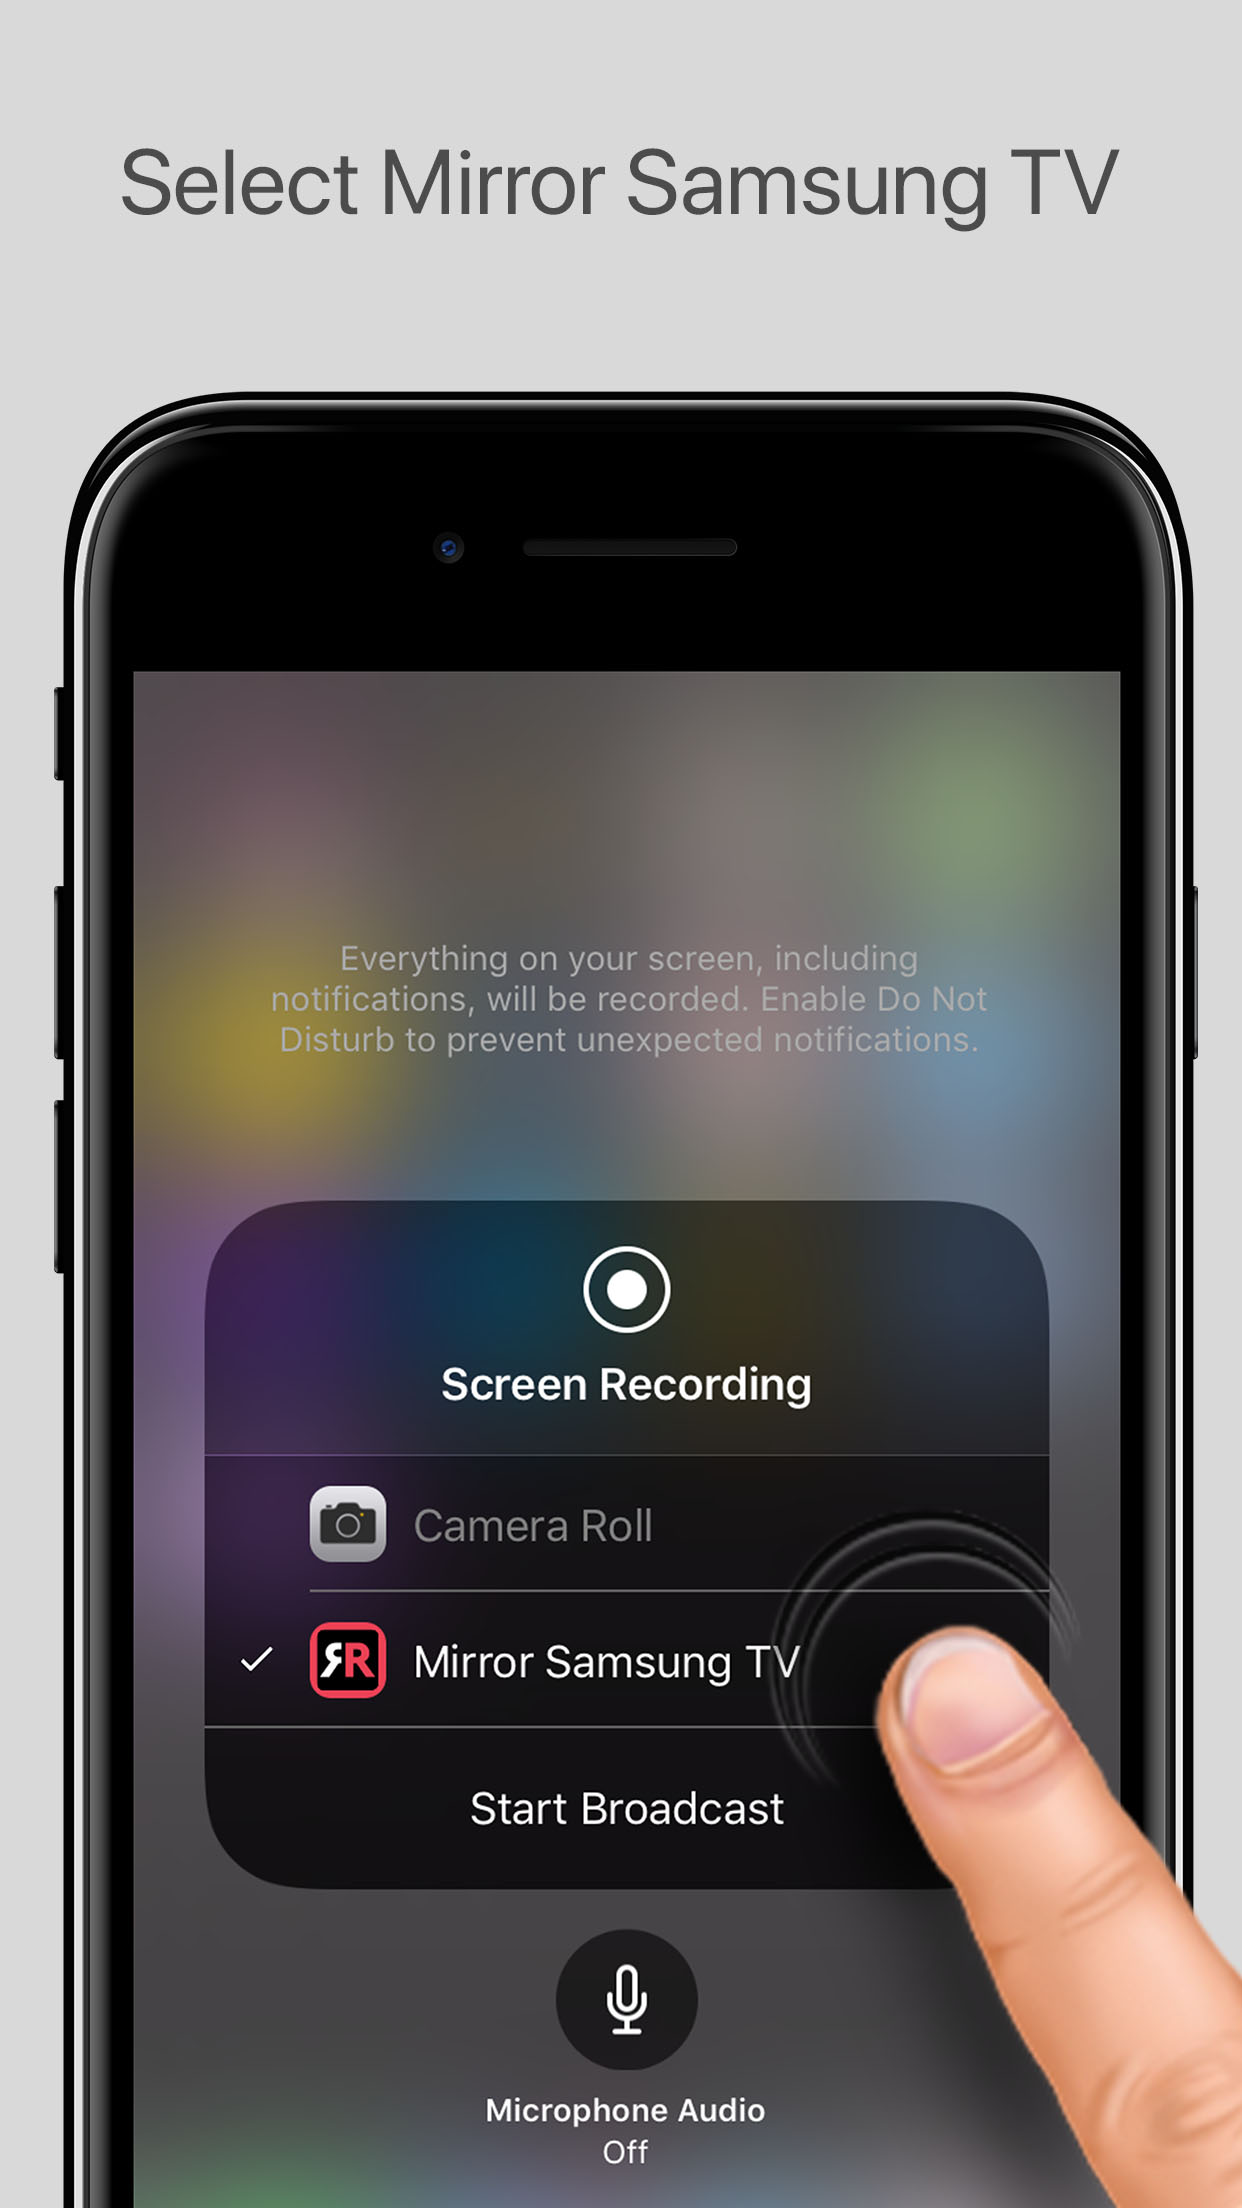 Mirror Your Iphone Or Ipad On A Smart Tv, Can You Do Screen Mirroring From Iphone To Samsung Tv